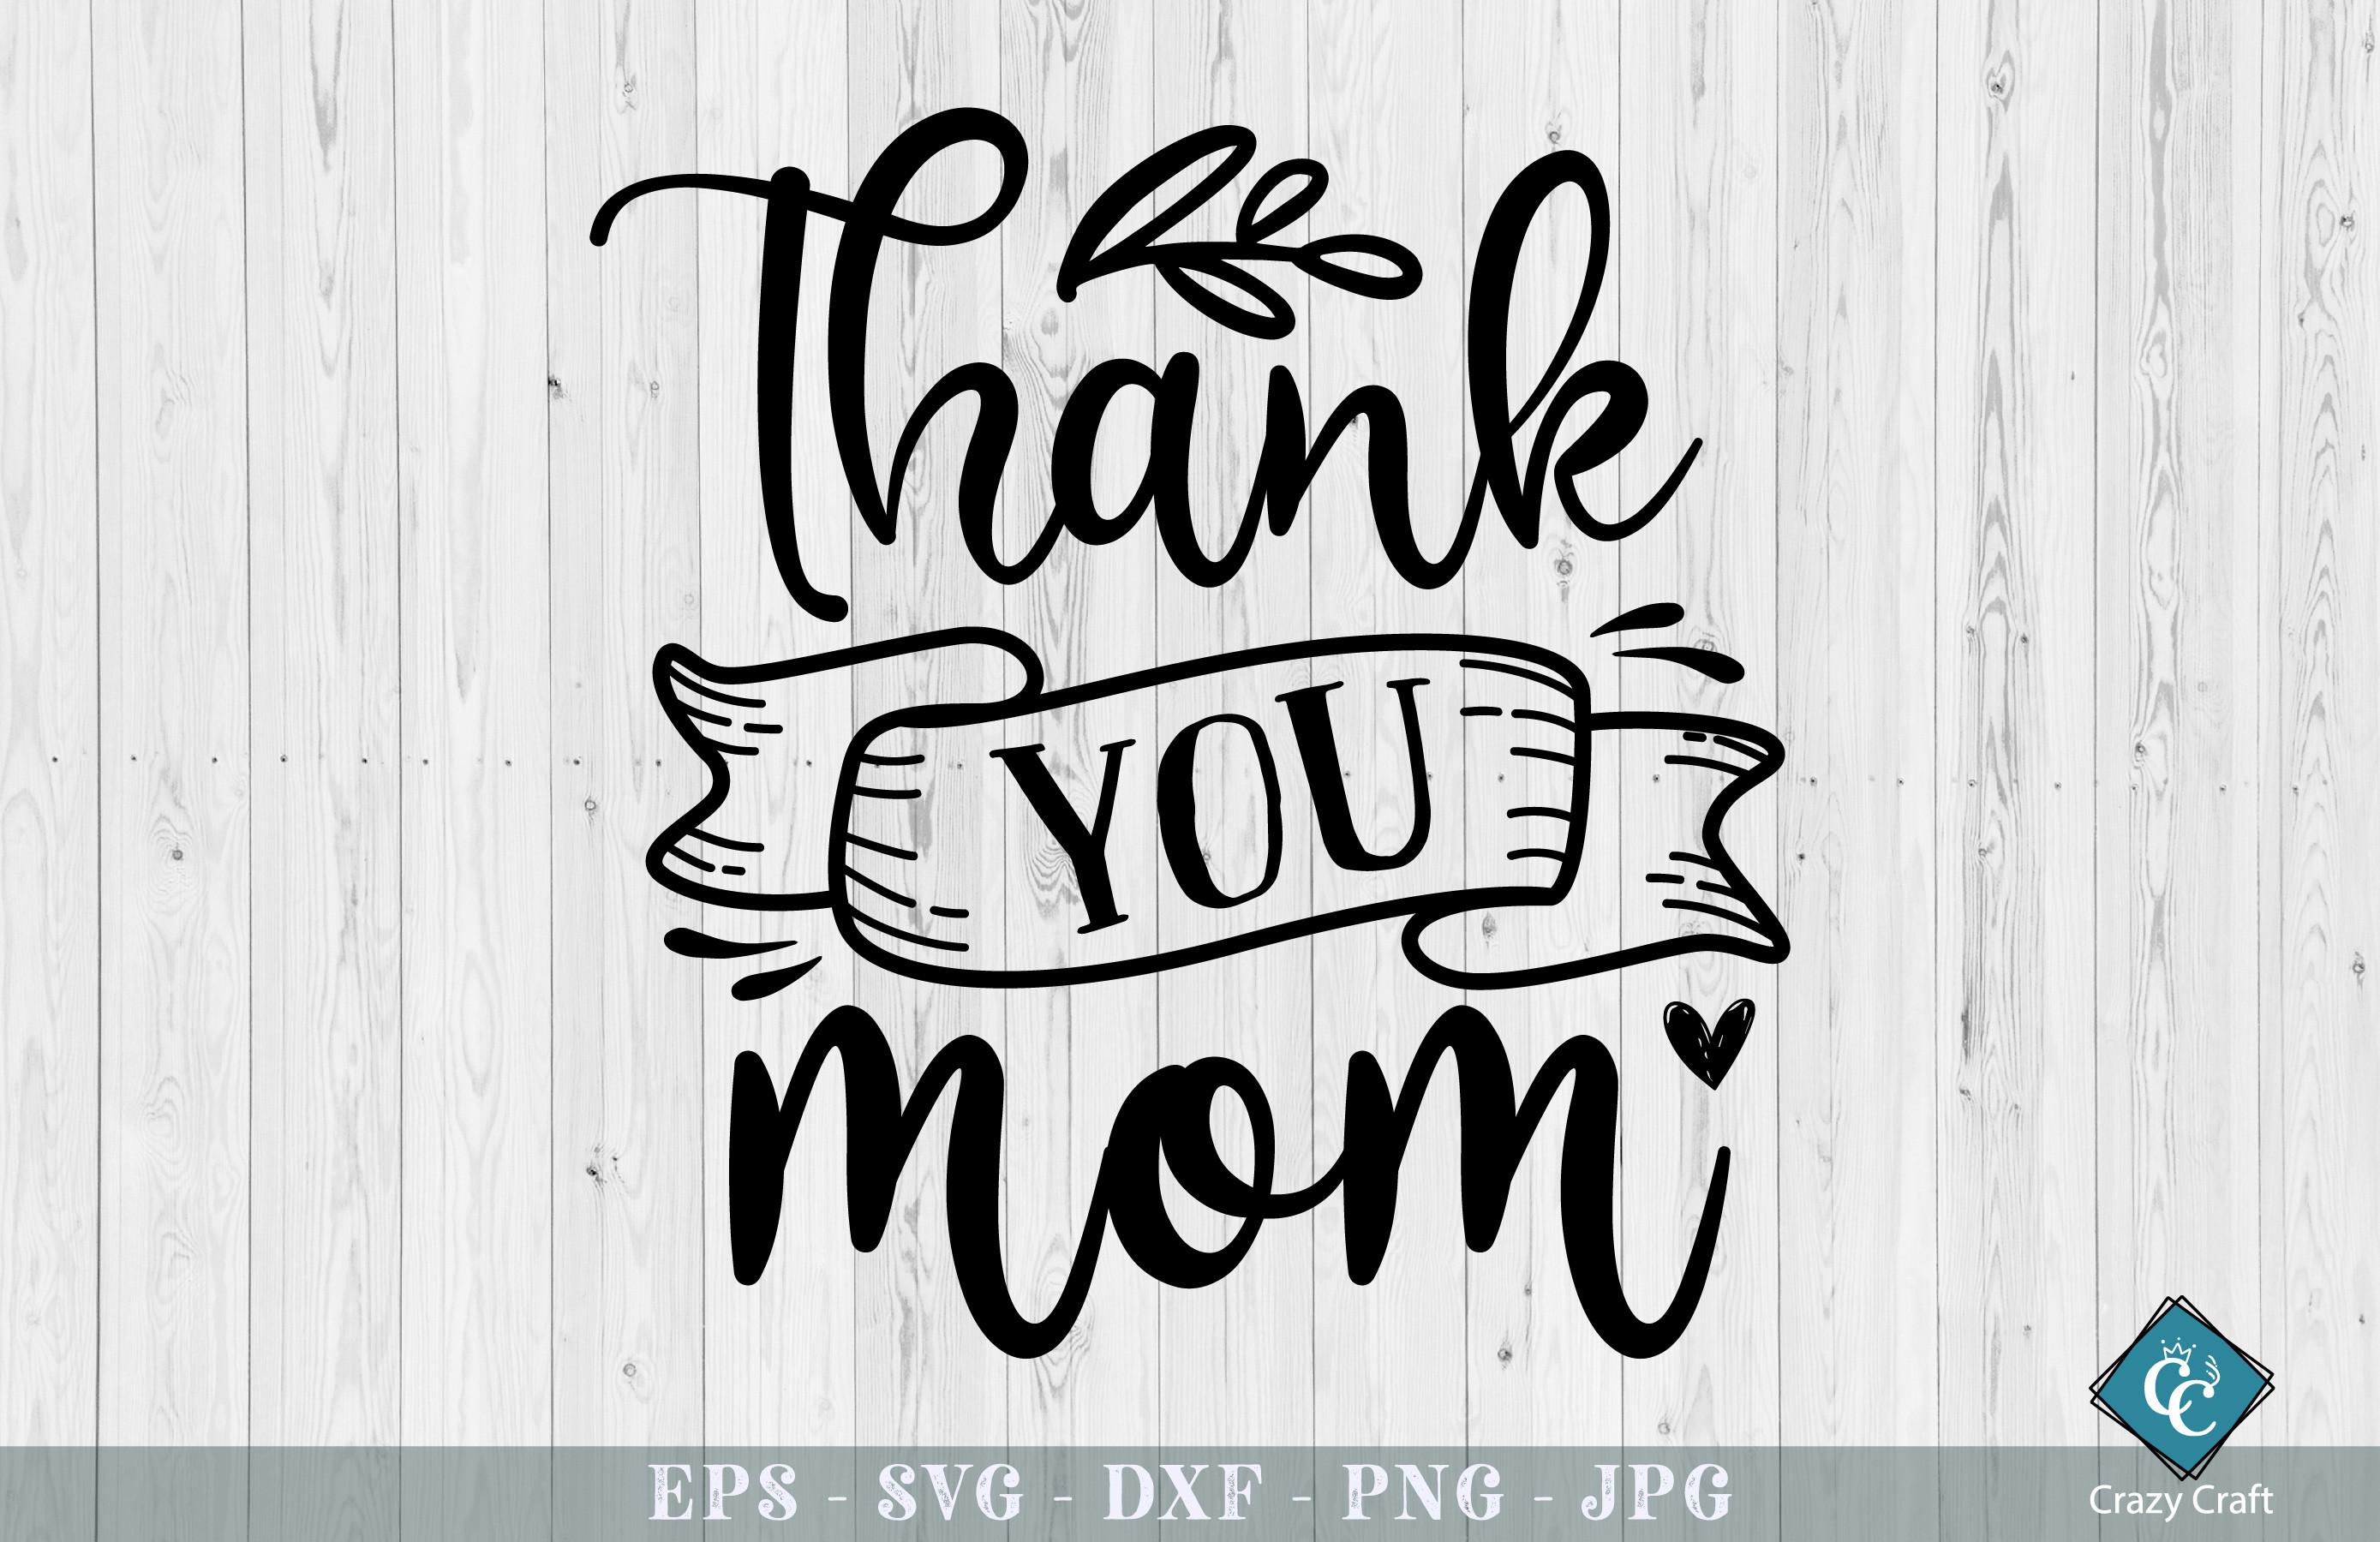 Thank You, Mom. Mother’s Day Design.